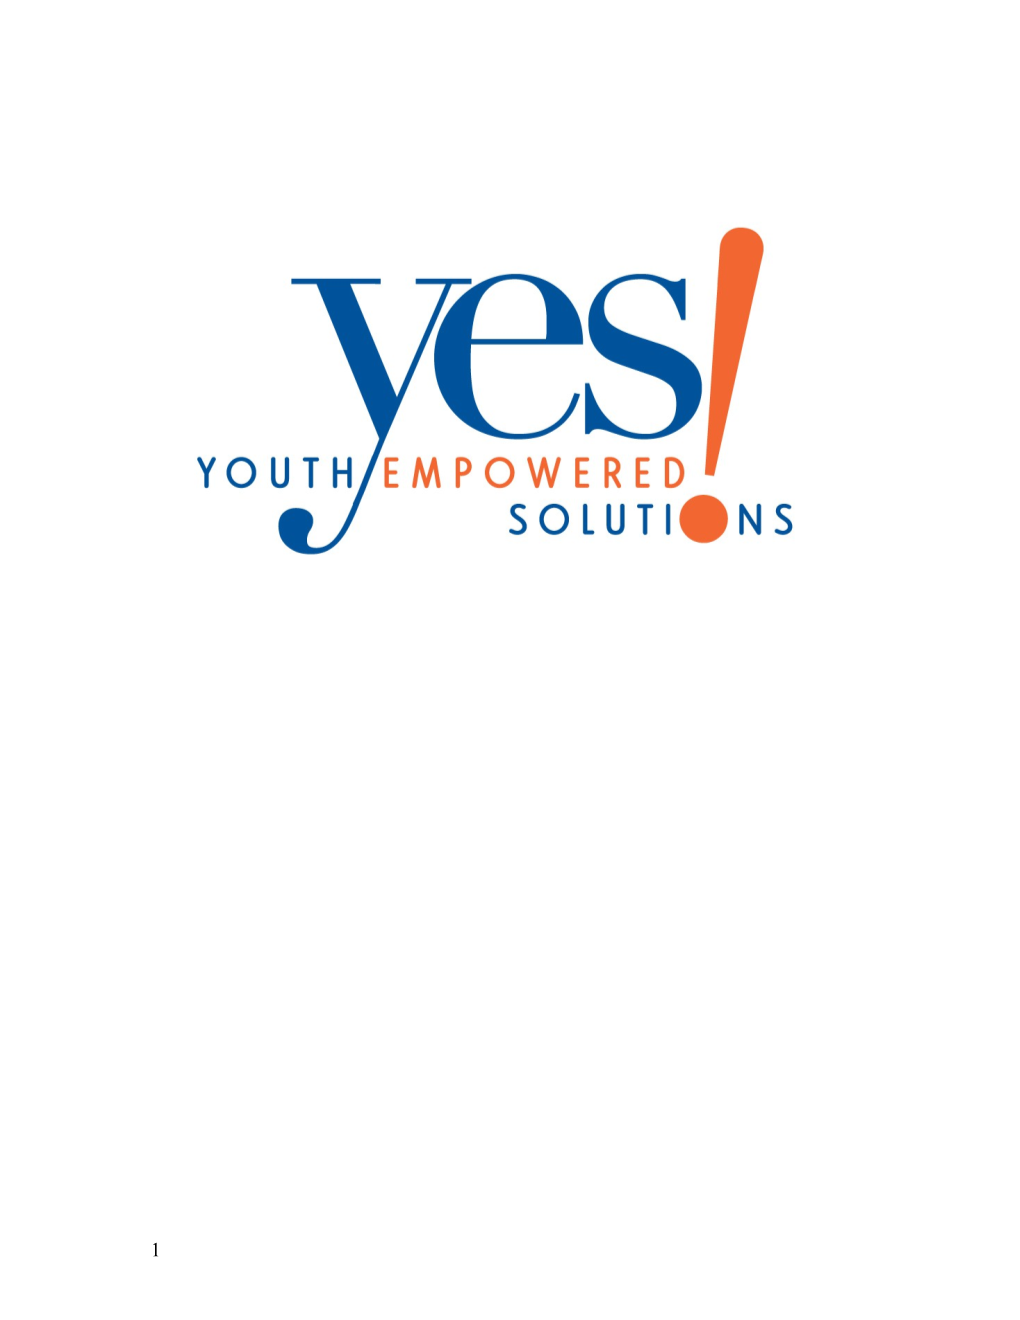 YES! Empowers Youth, in Partnership with Adults, to Create Community Change